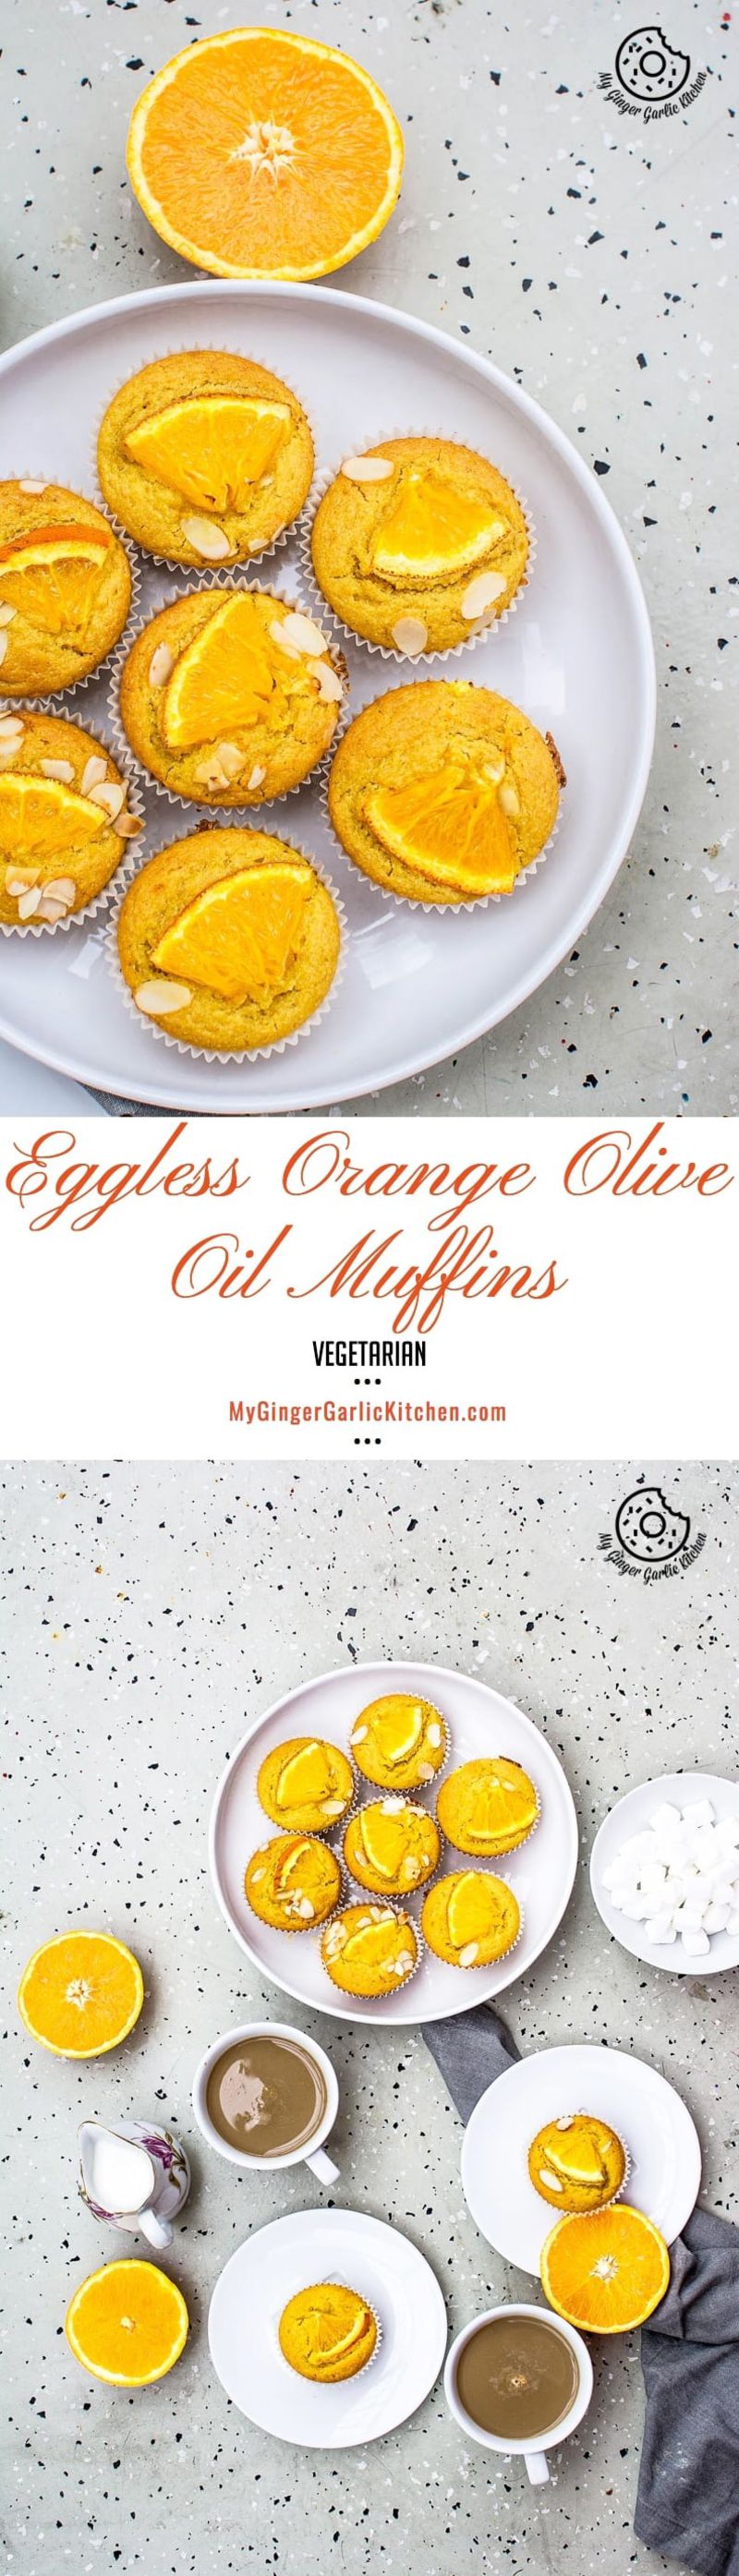 eggless orange olive oil muffins on a plate with a spoon and a plate of oranges